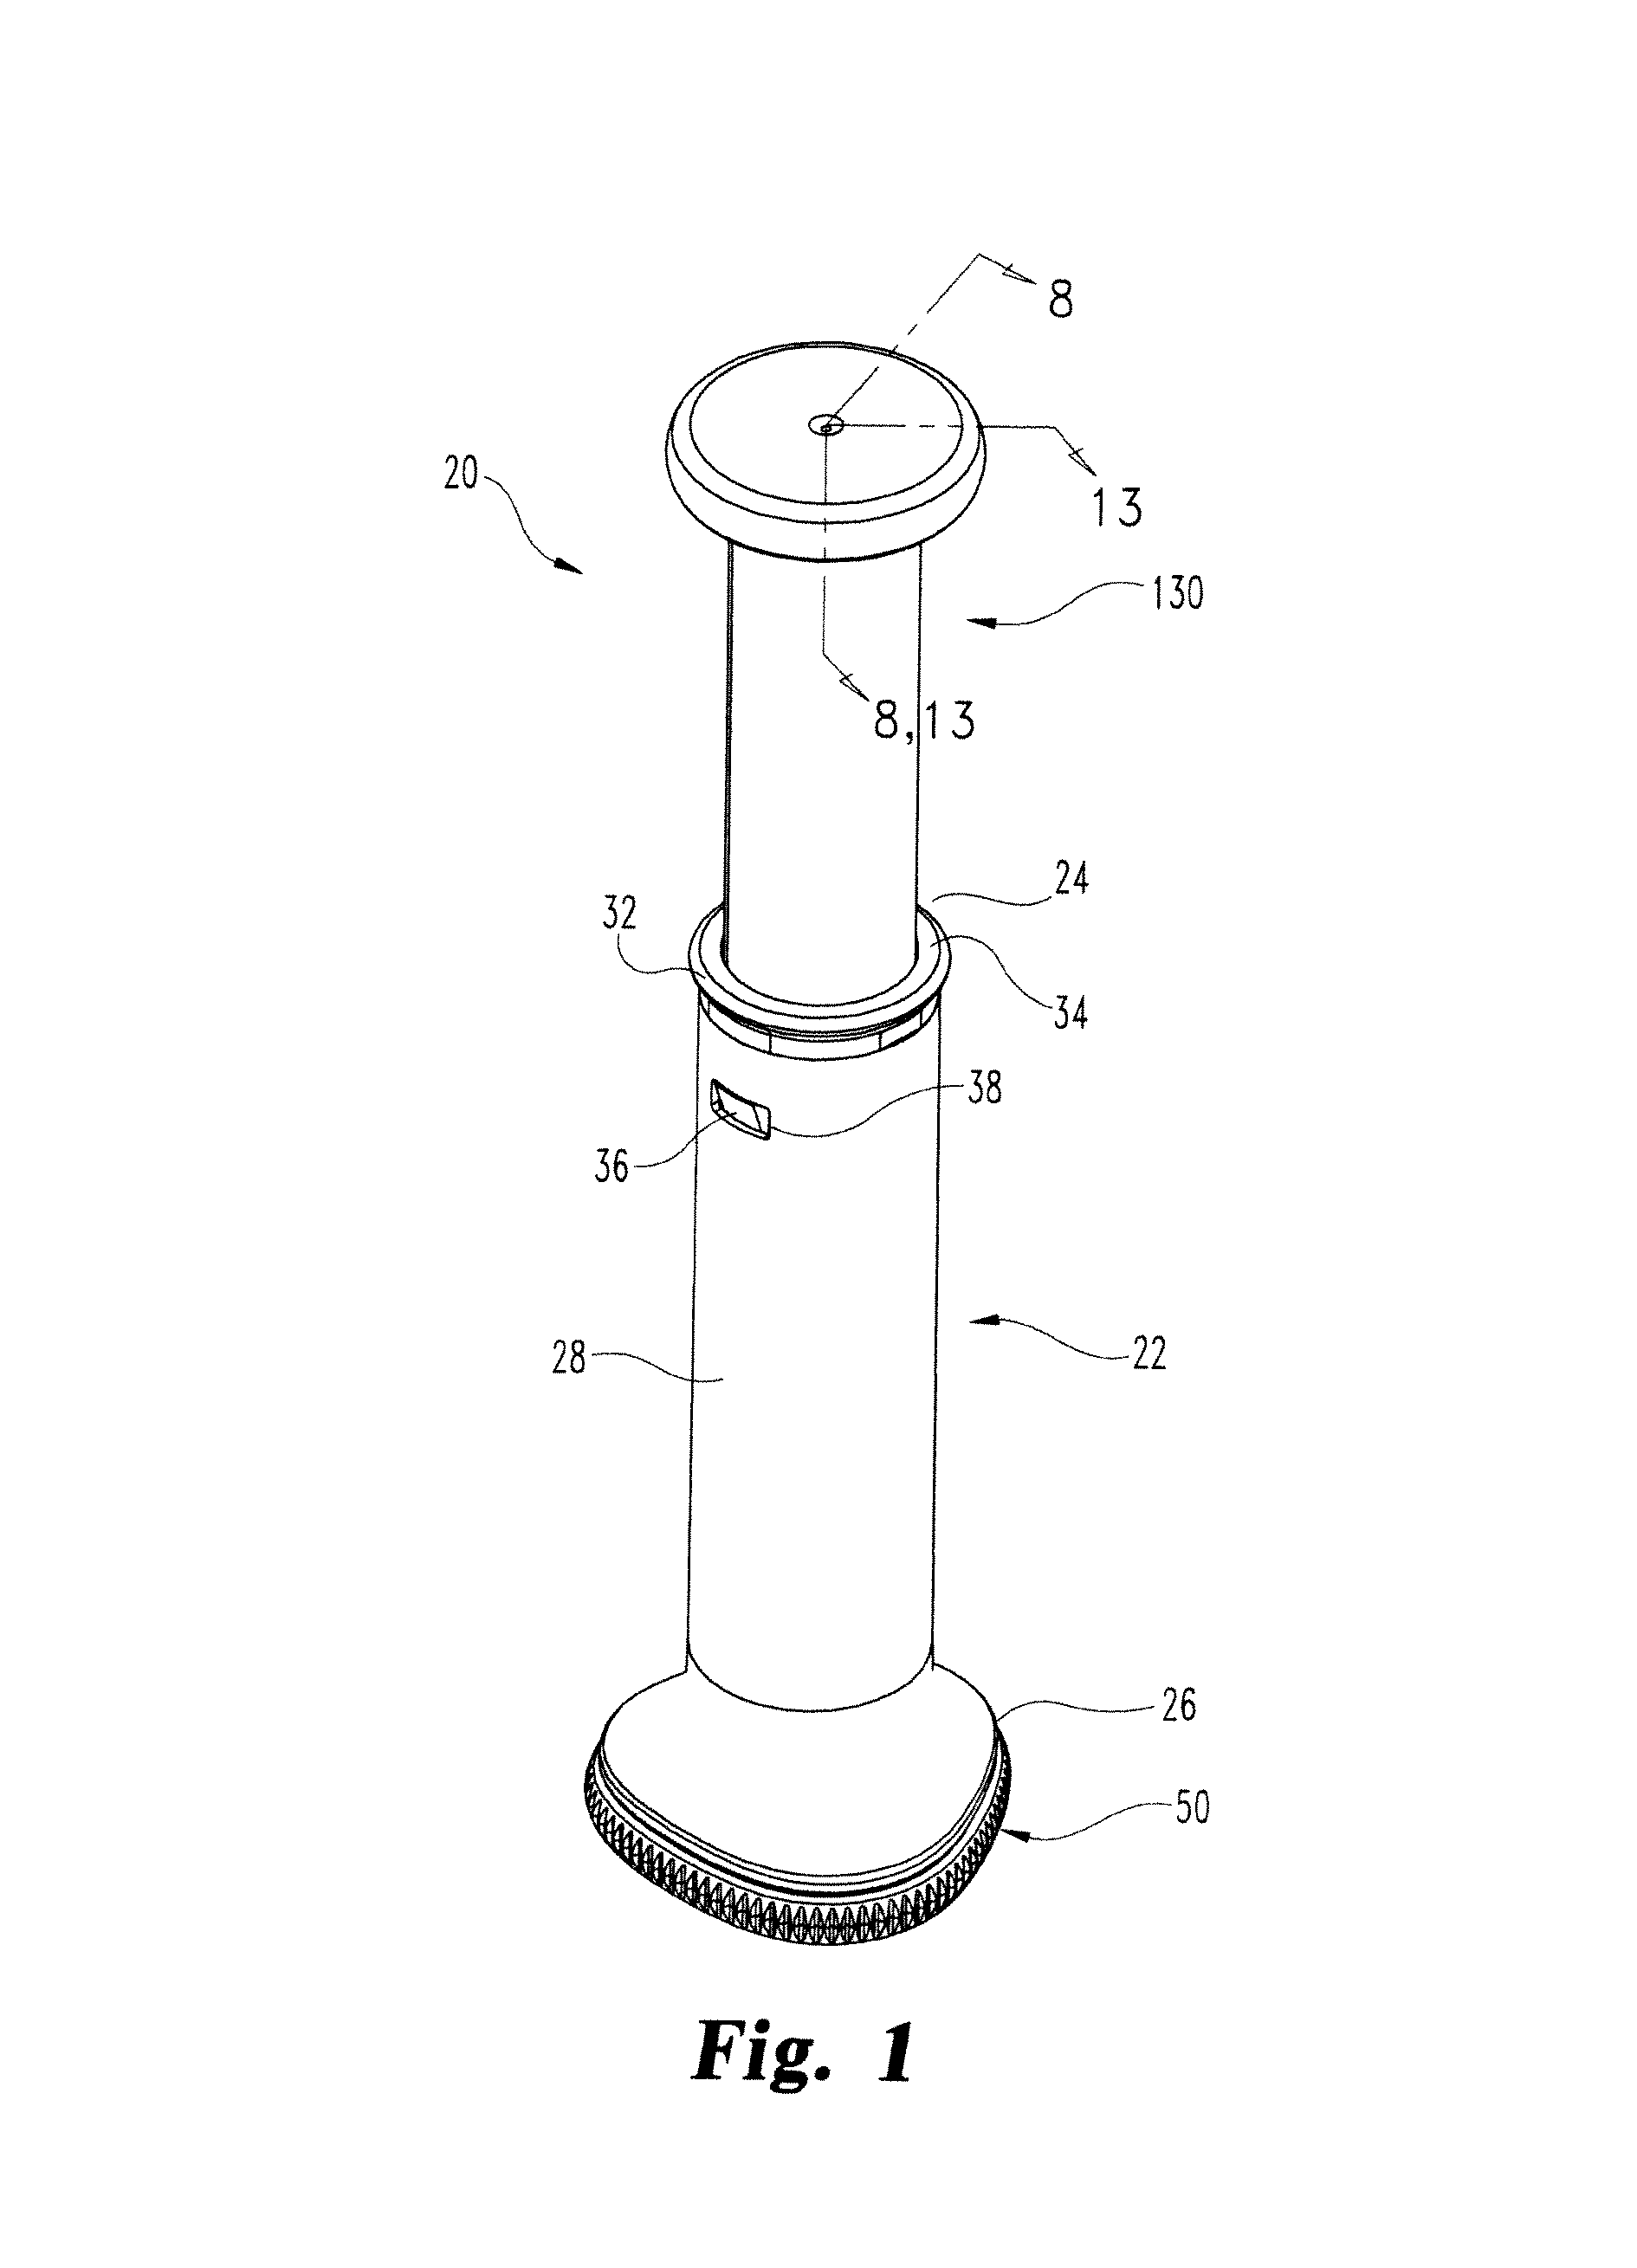 Apparatus for injecting a pharmaceutical with automatic syringe retraction following injection